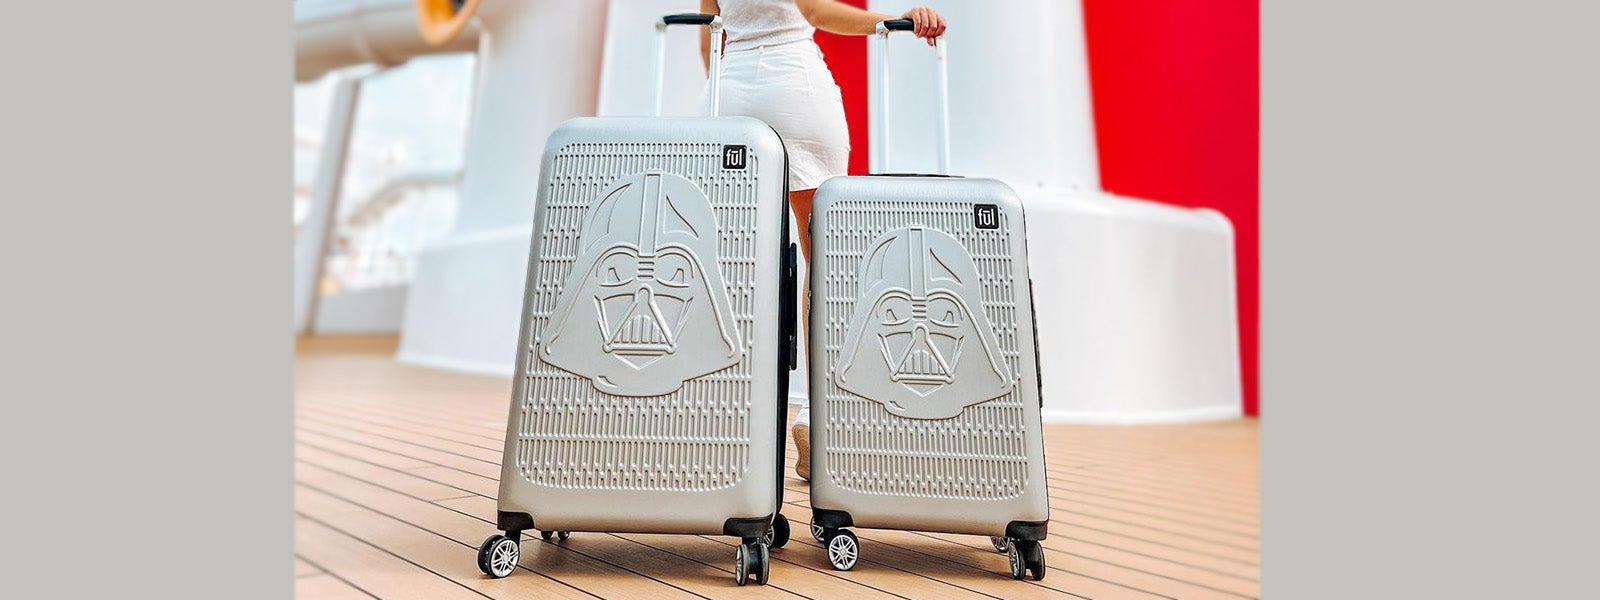 Ful Star Wars hardside spinner suitcase rolling luggage